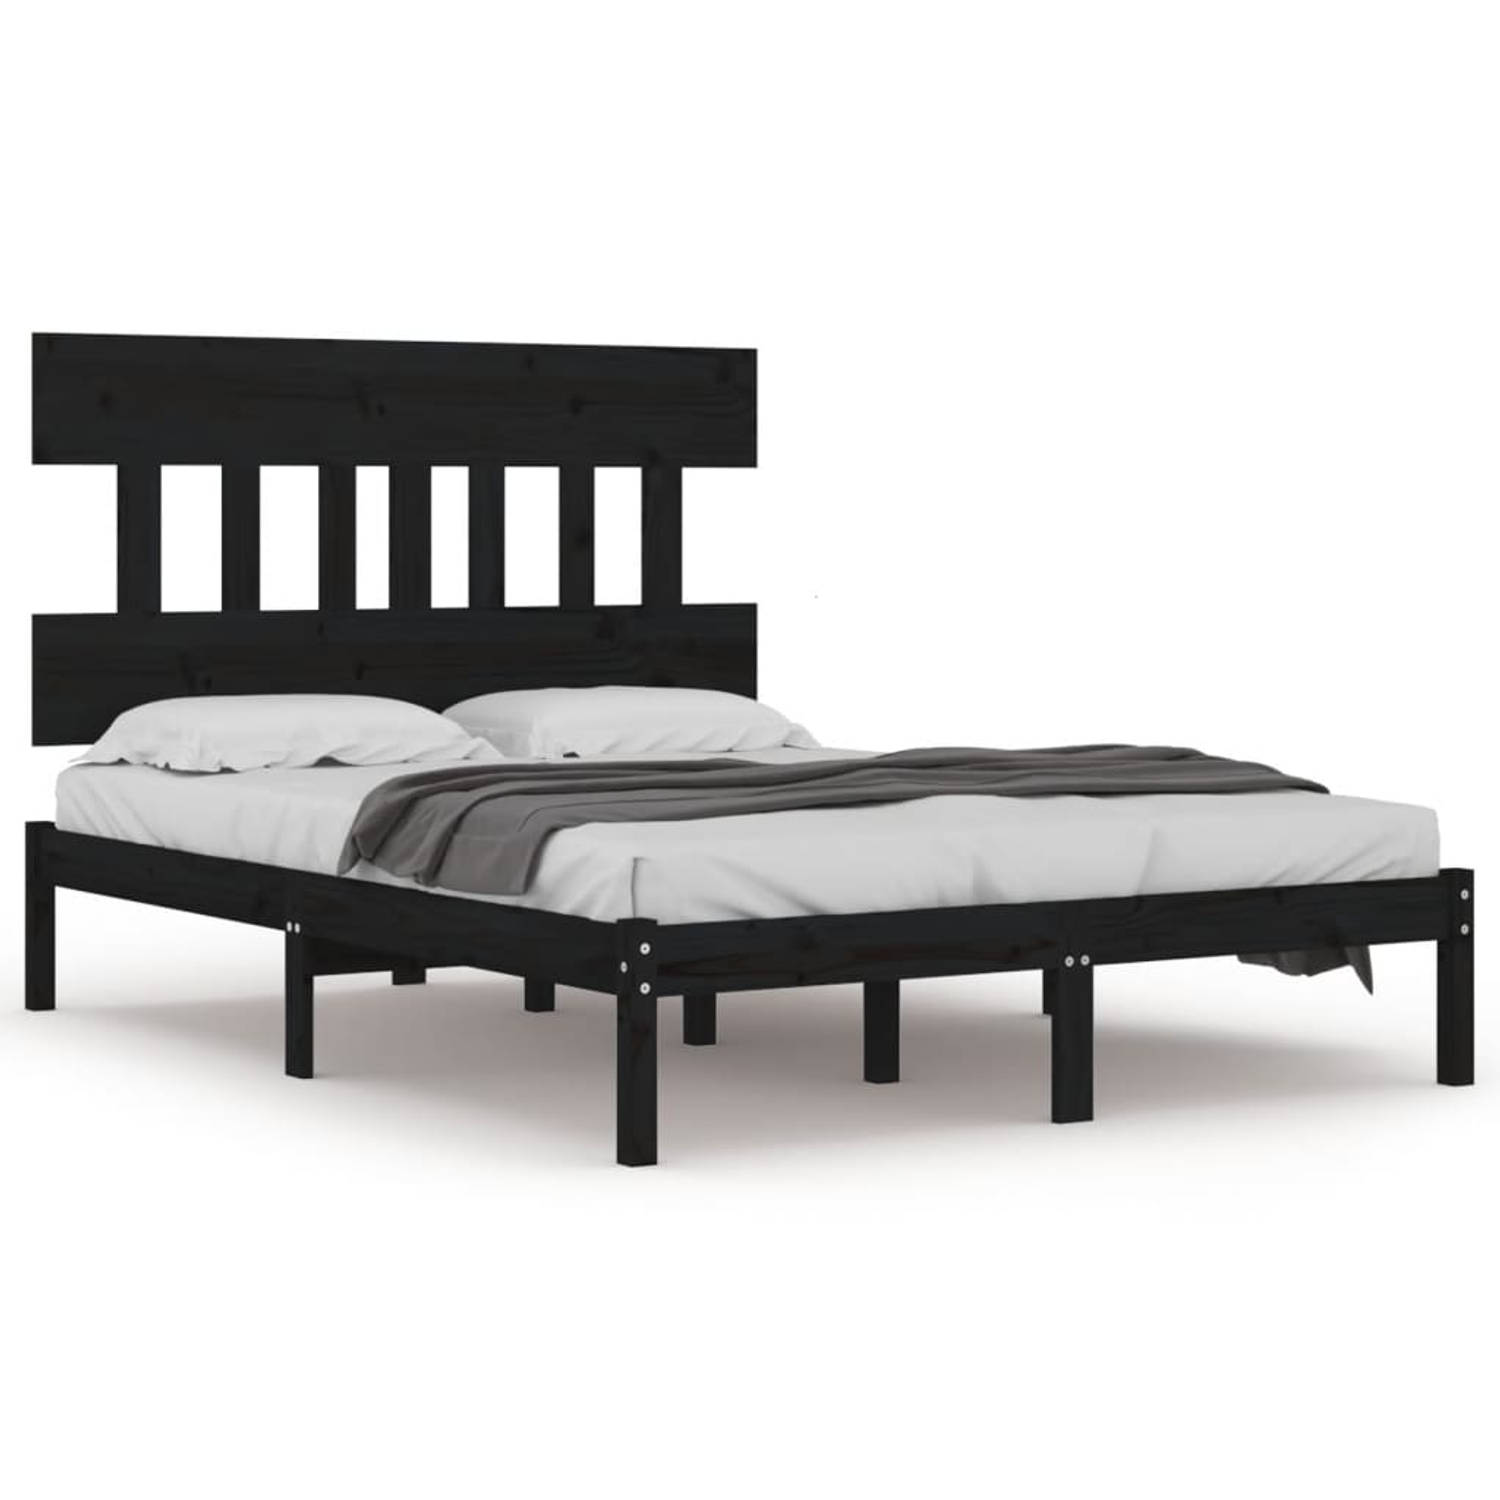 The Living Store Bedframe massief hout zwart 150x200 cm 5FT King Size - Bed